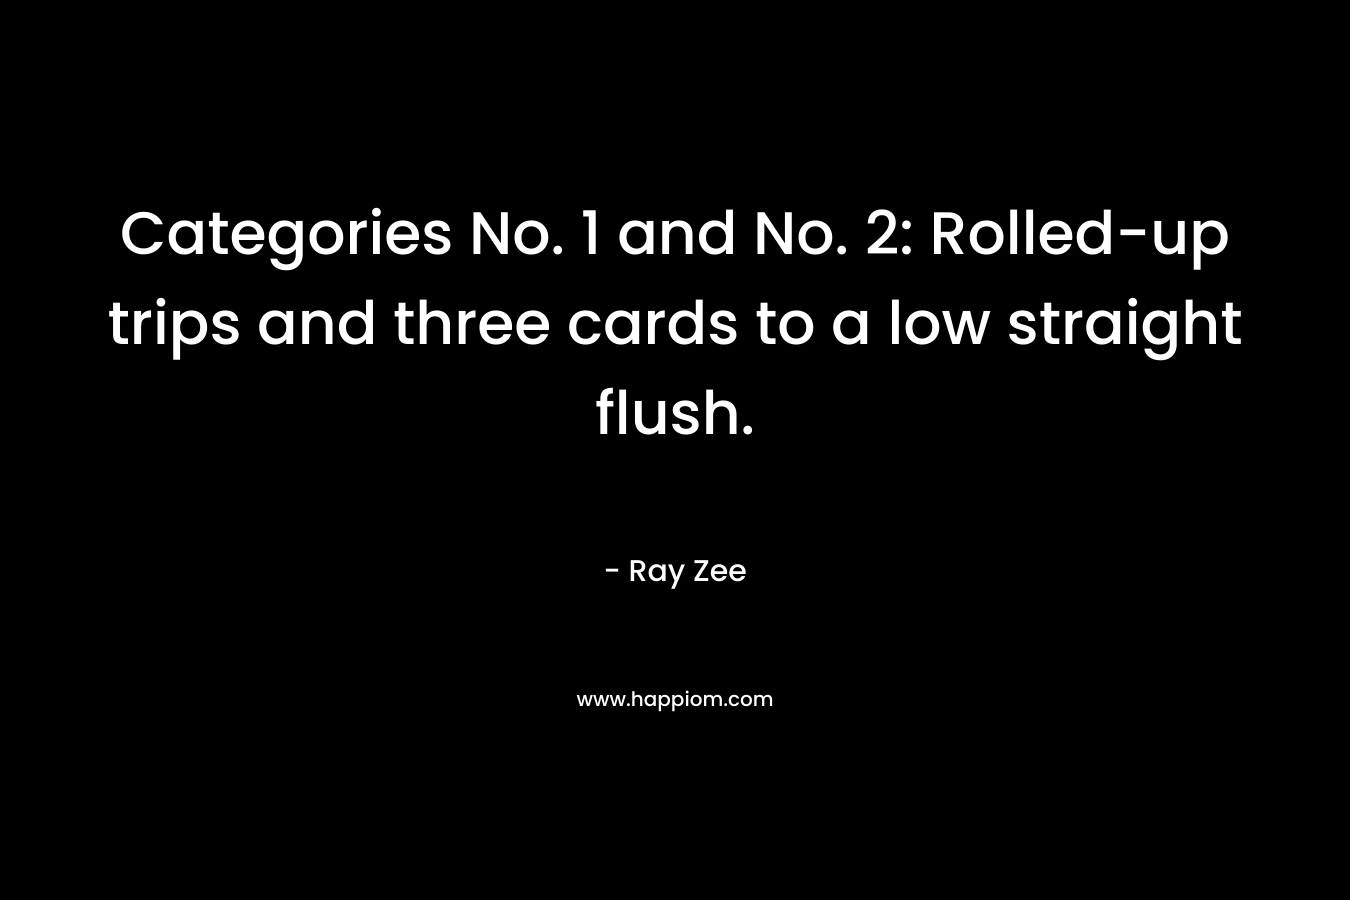 Categories No. 1 and No. 2: Rolled-up trips and three cards to a low straight flush. – Ray Zee